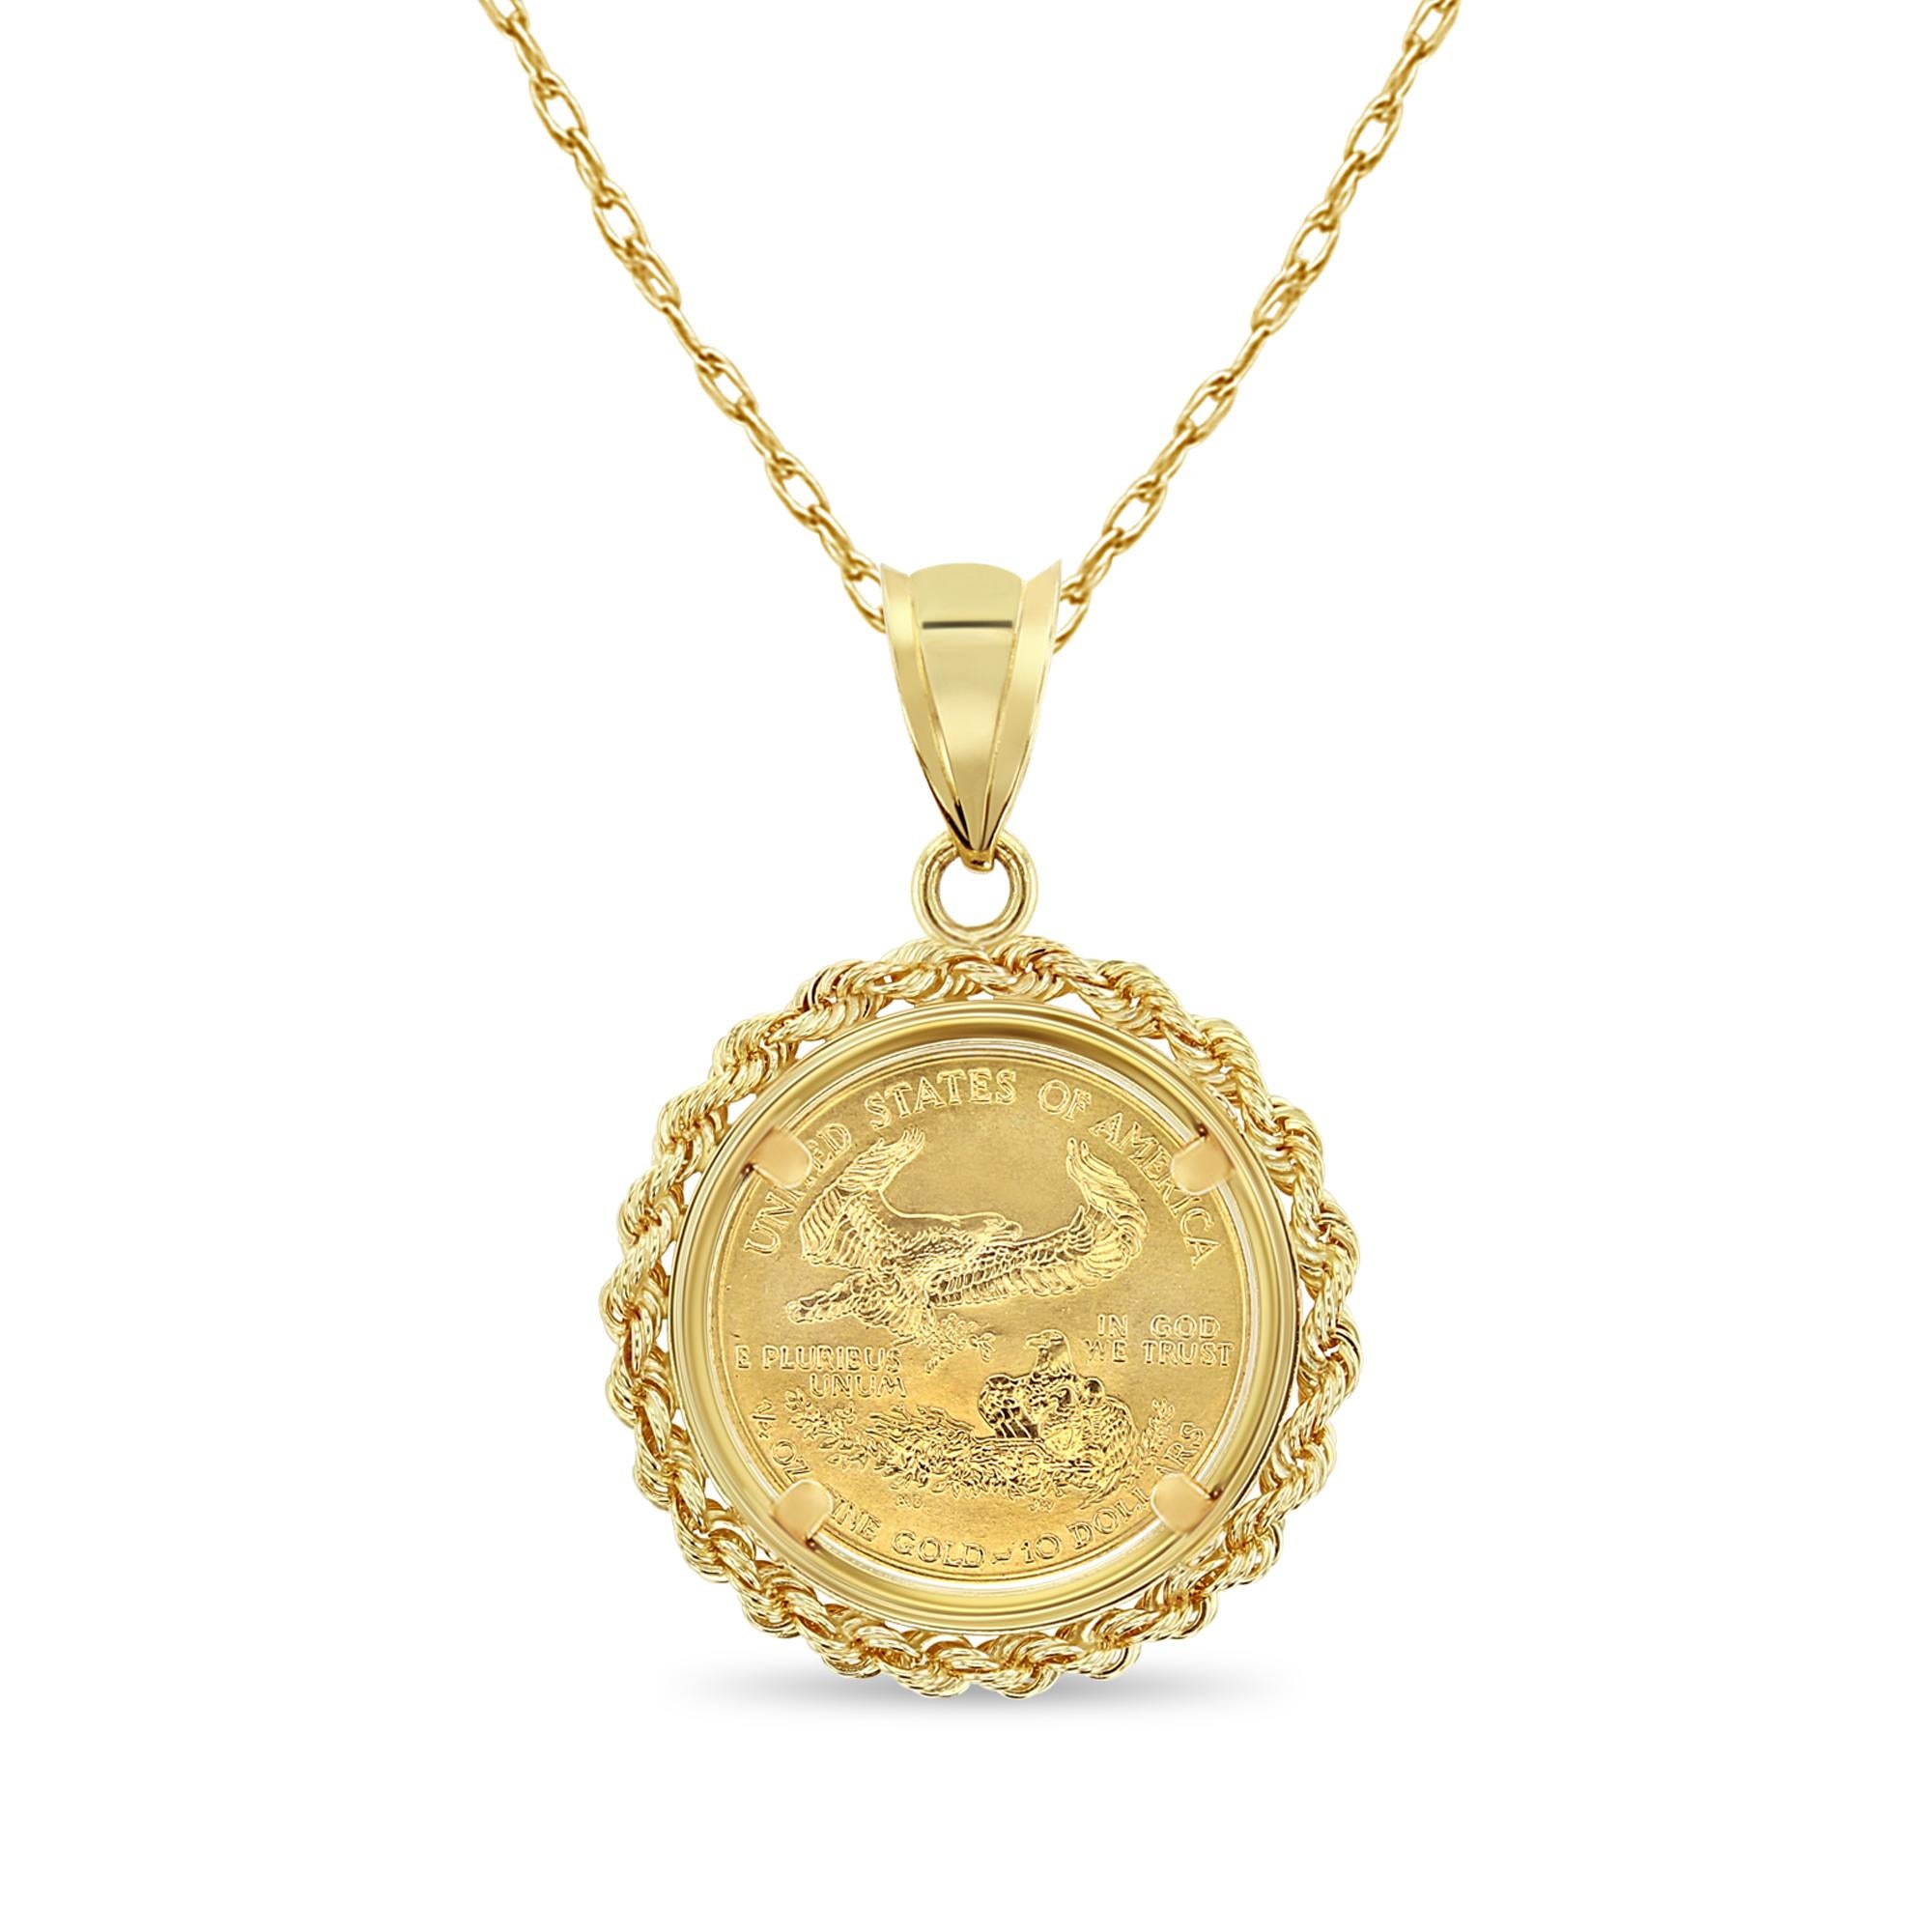 ♥ Coin Information ♥

Coin Metal: 22K Fine Gold
Metal Content: 1/4OZ Fine Gold
Denomination: $10
Obverse: Lady Liberty Holding Branch Torch
Reverse: Flying Eagle
Year: Varies

♥ Bezel Information ♥

Style: Rope Setting
Setting Material: 14k Yellow